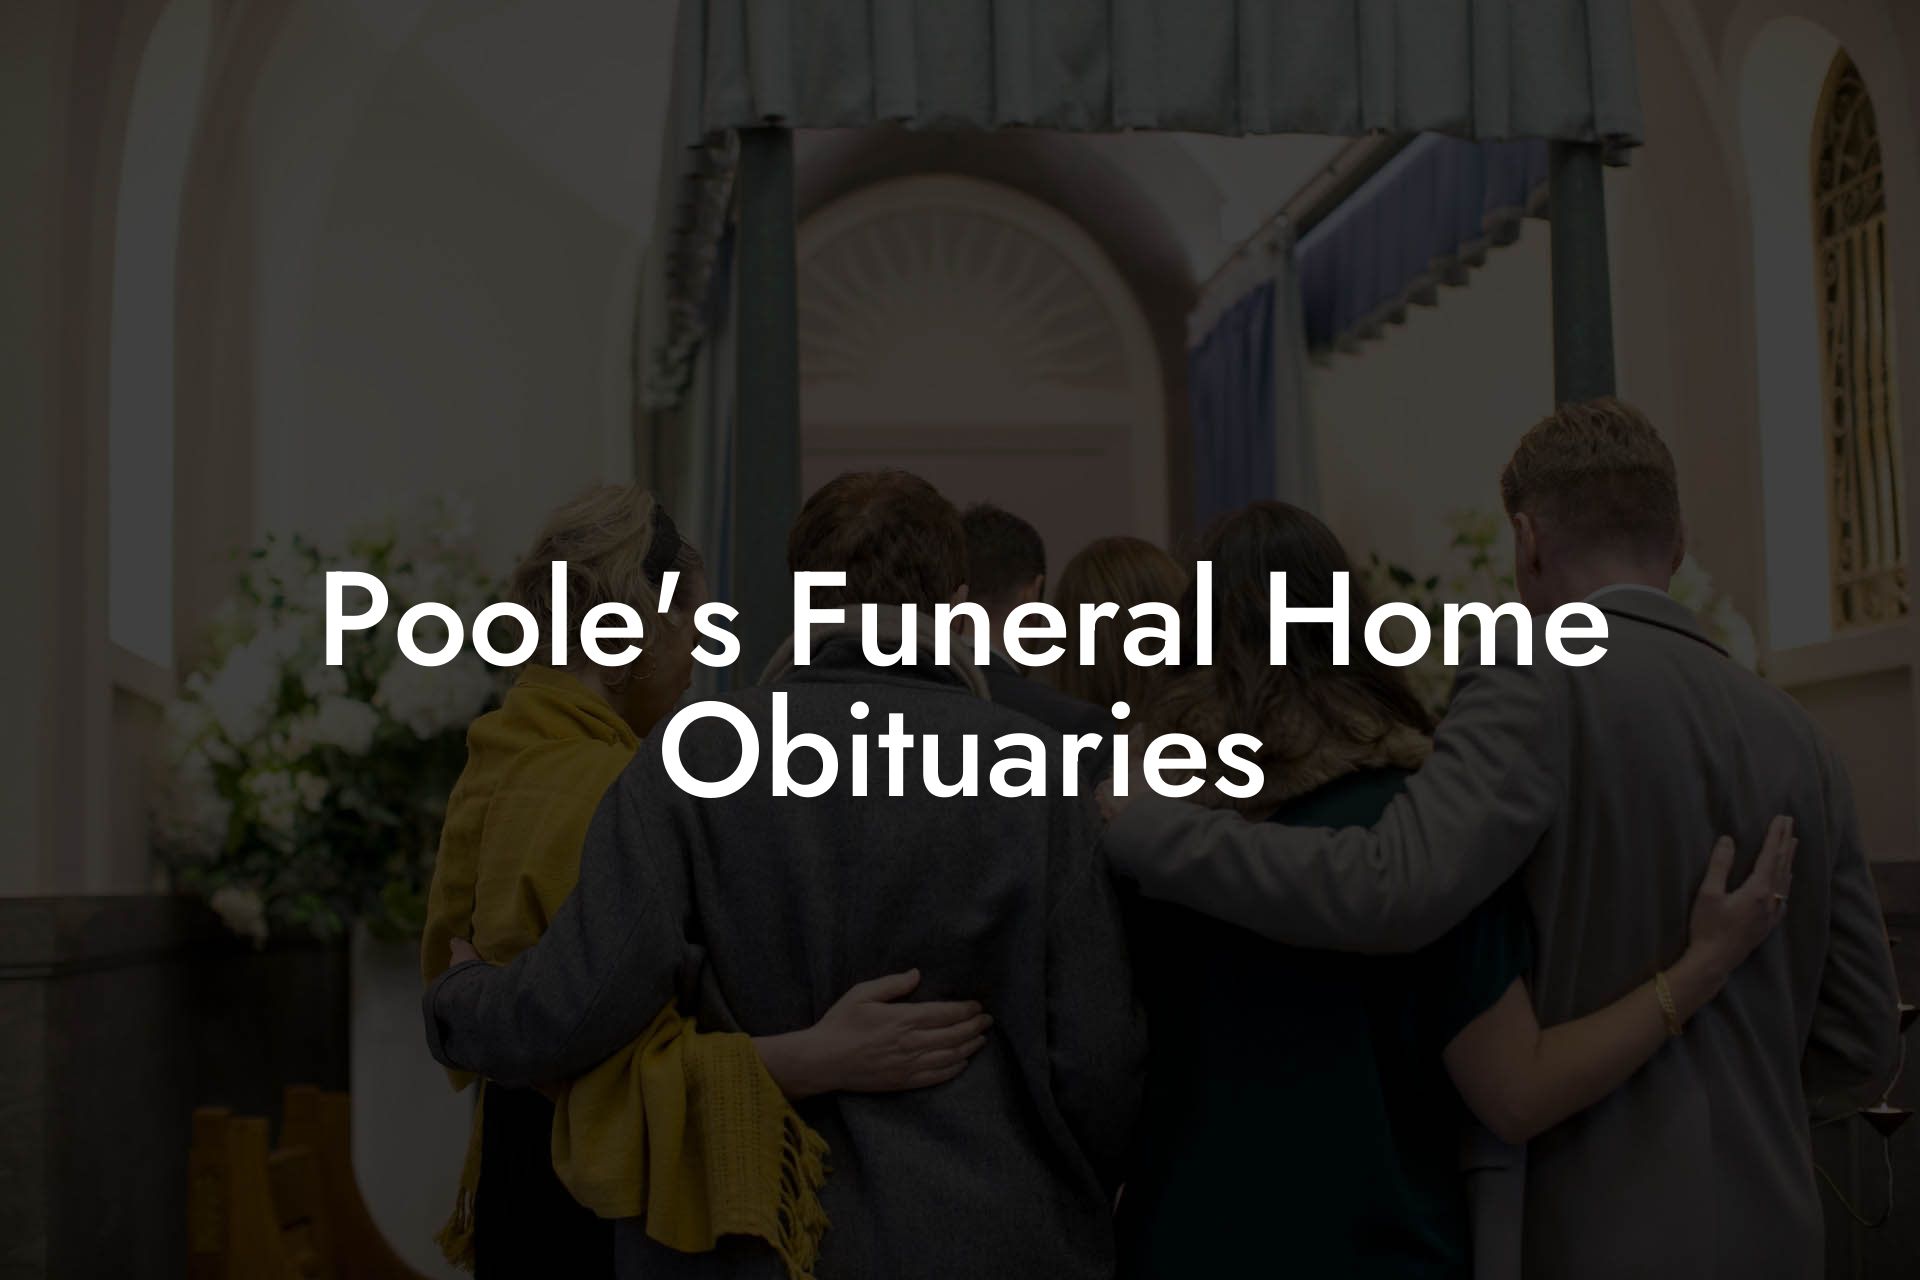 Poole's Funeral Home Obituaries